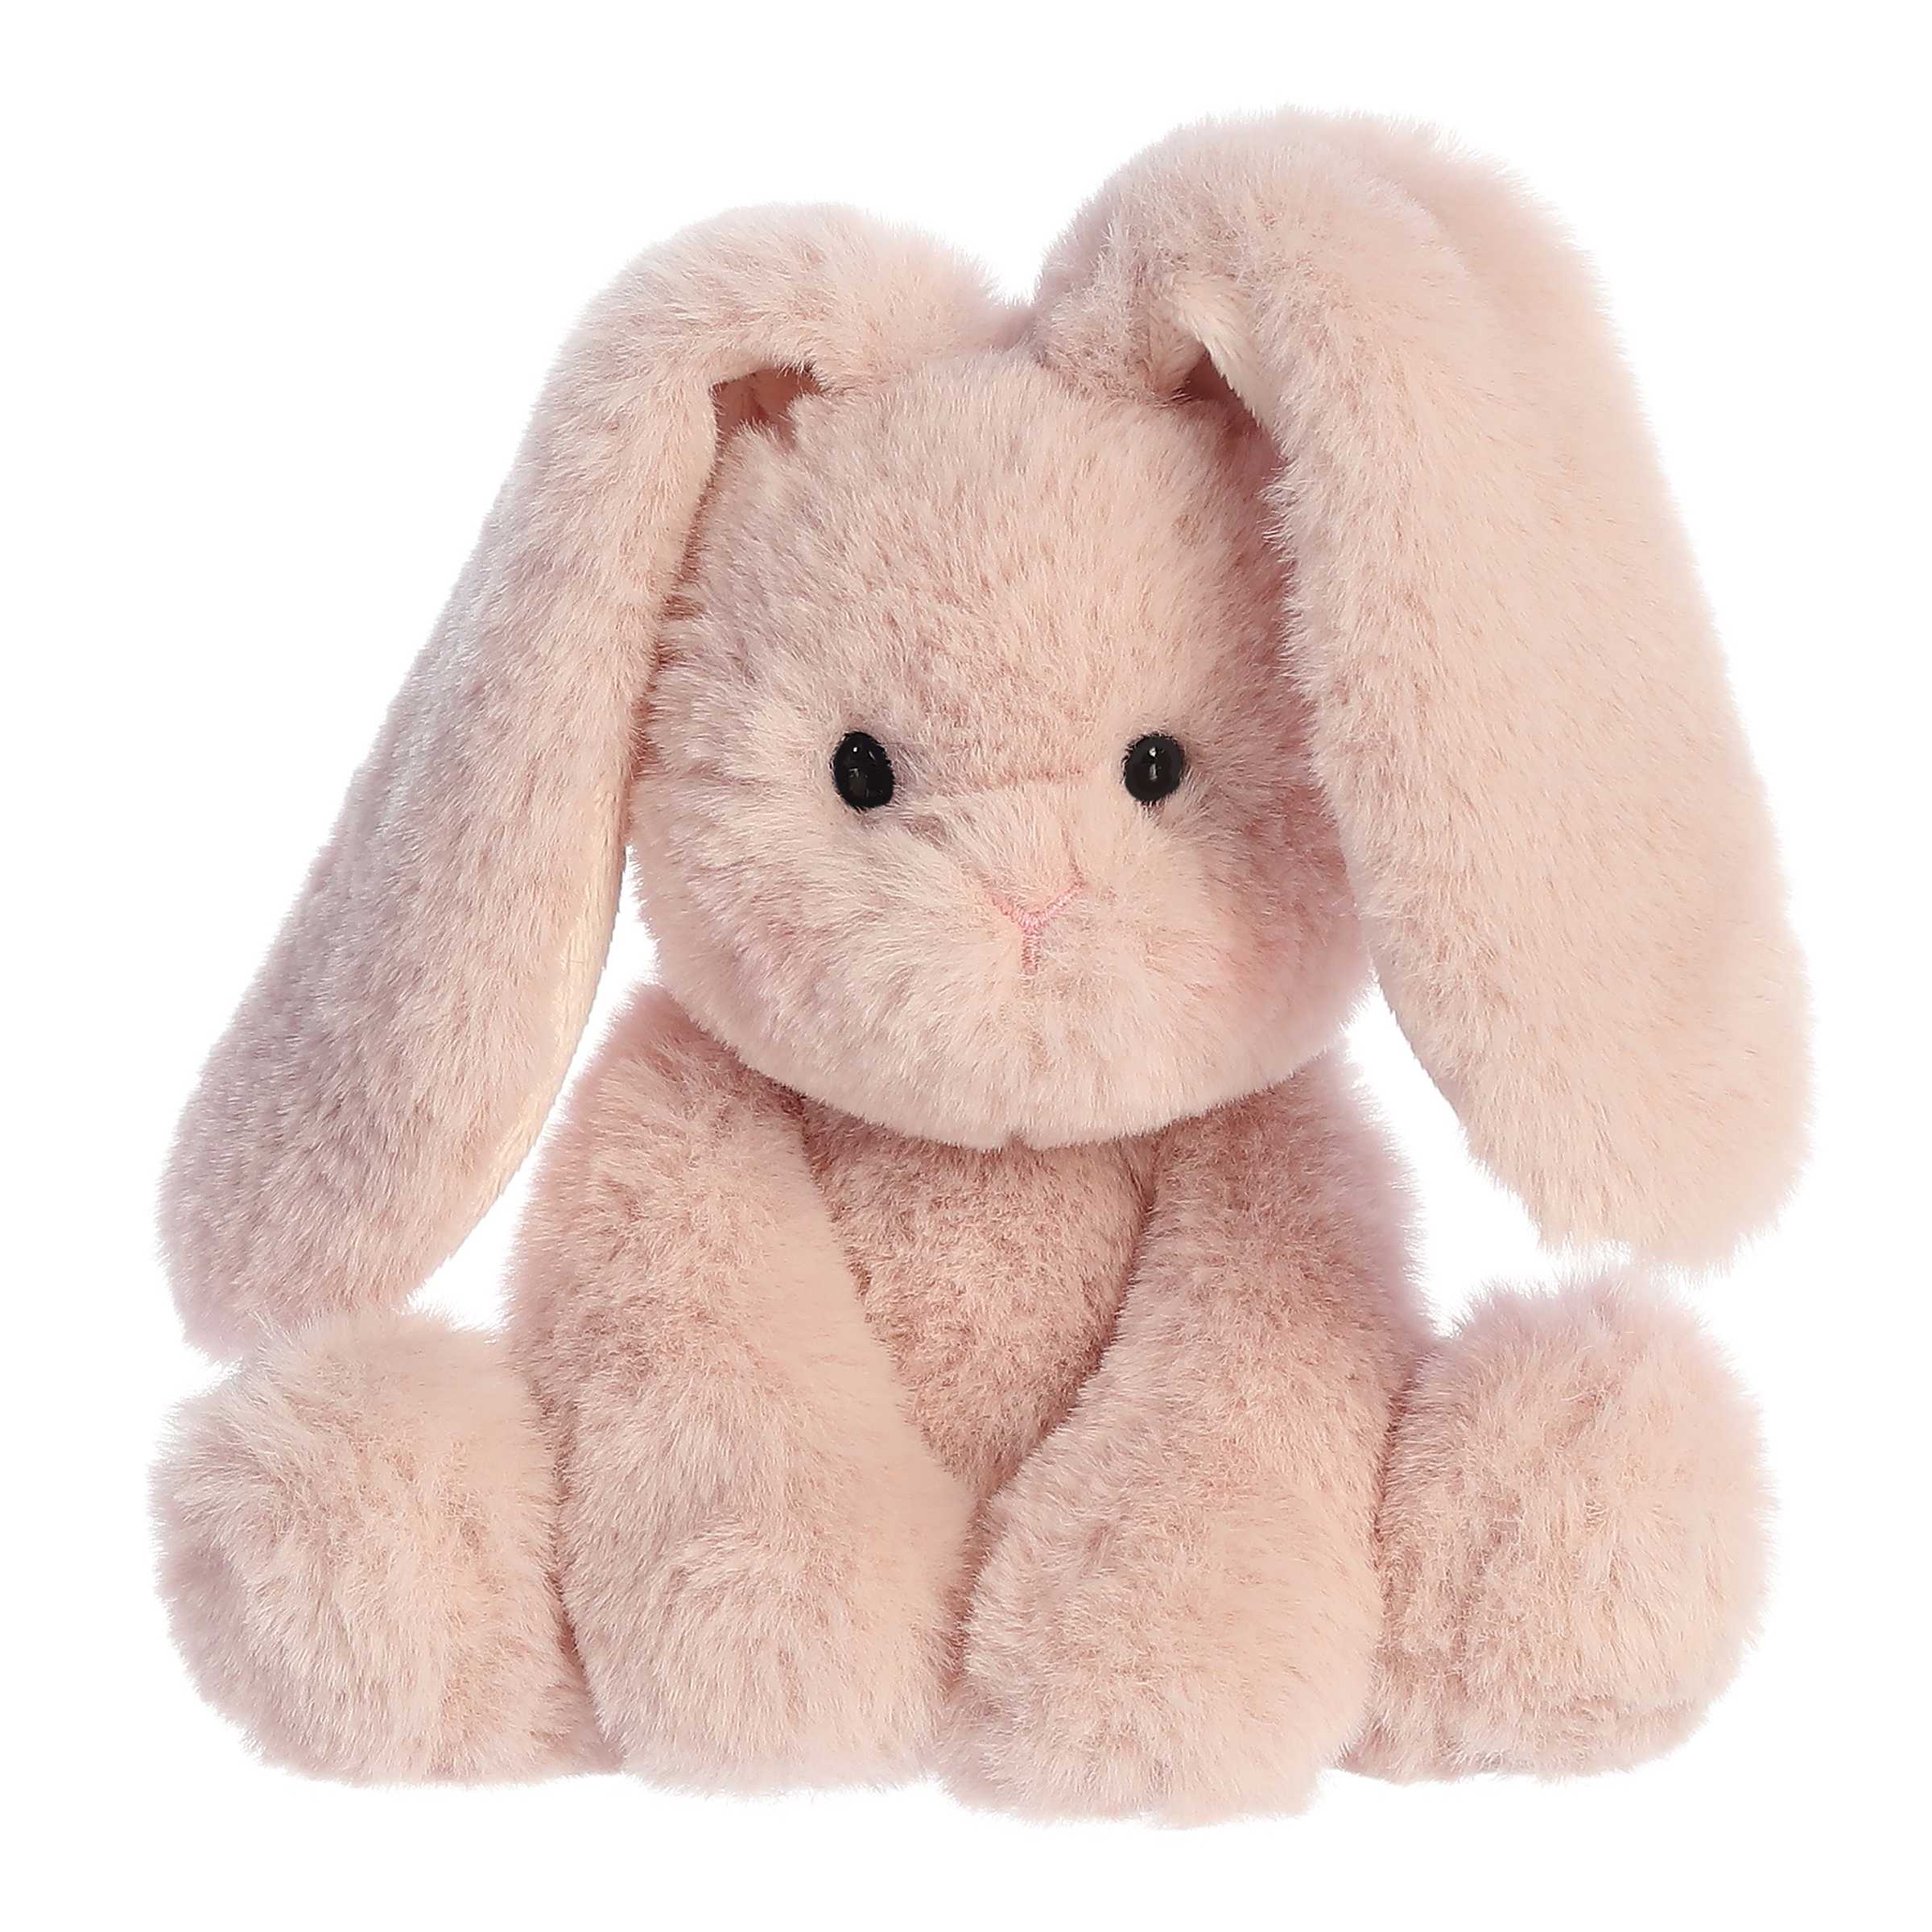 Pink Candy Cottontail bunny plush with ultra-soft pink fur, bright eyes, from the exclusive Candy Cottontails